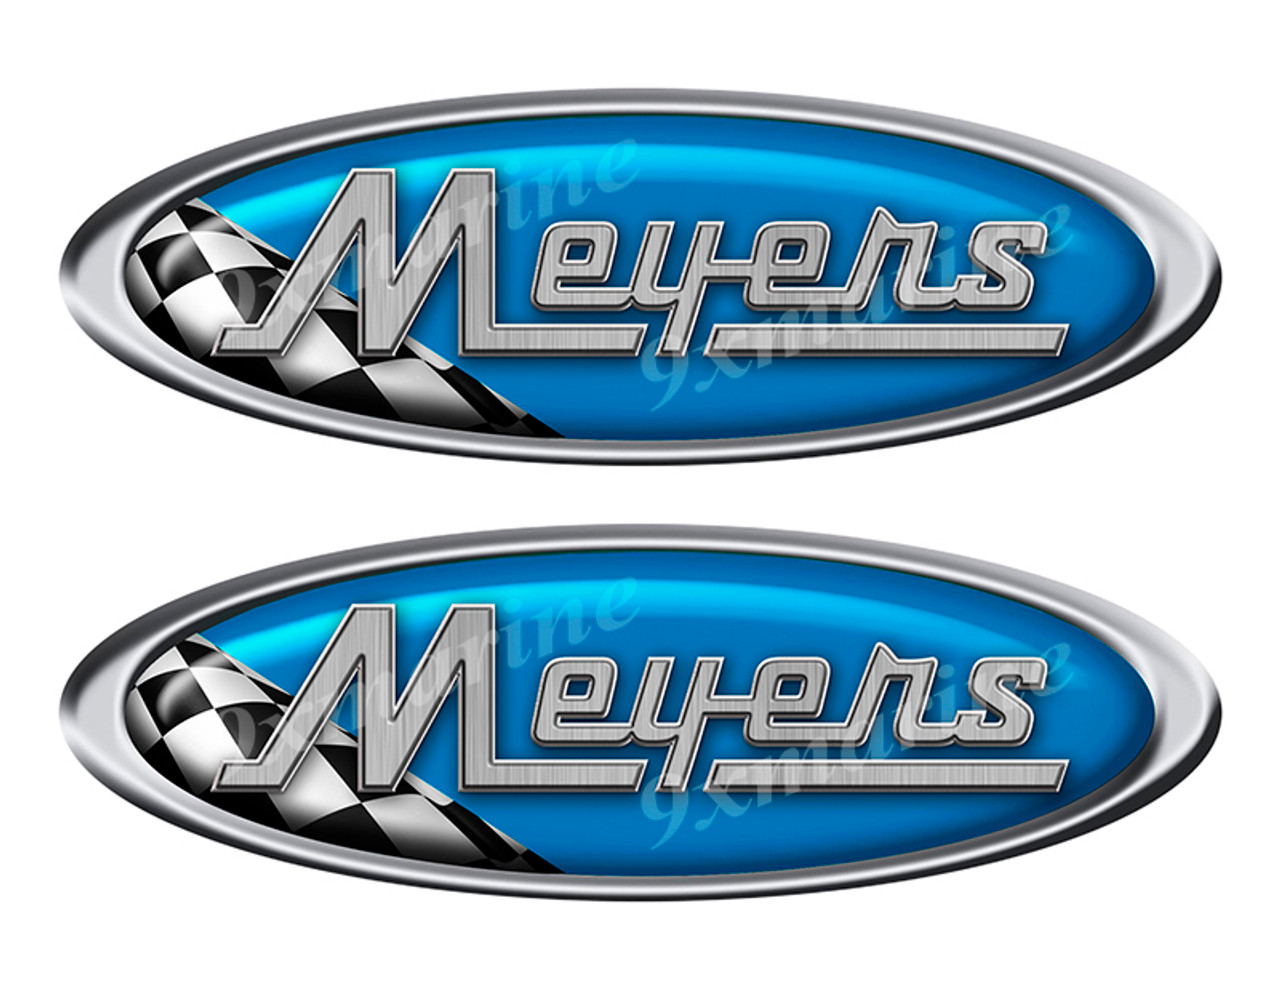 Two Meyers Boat Vinyl Racing Oval Stickers - 10" long